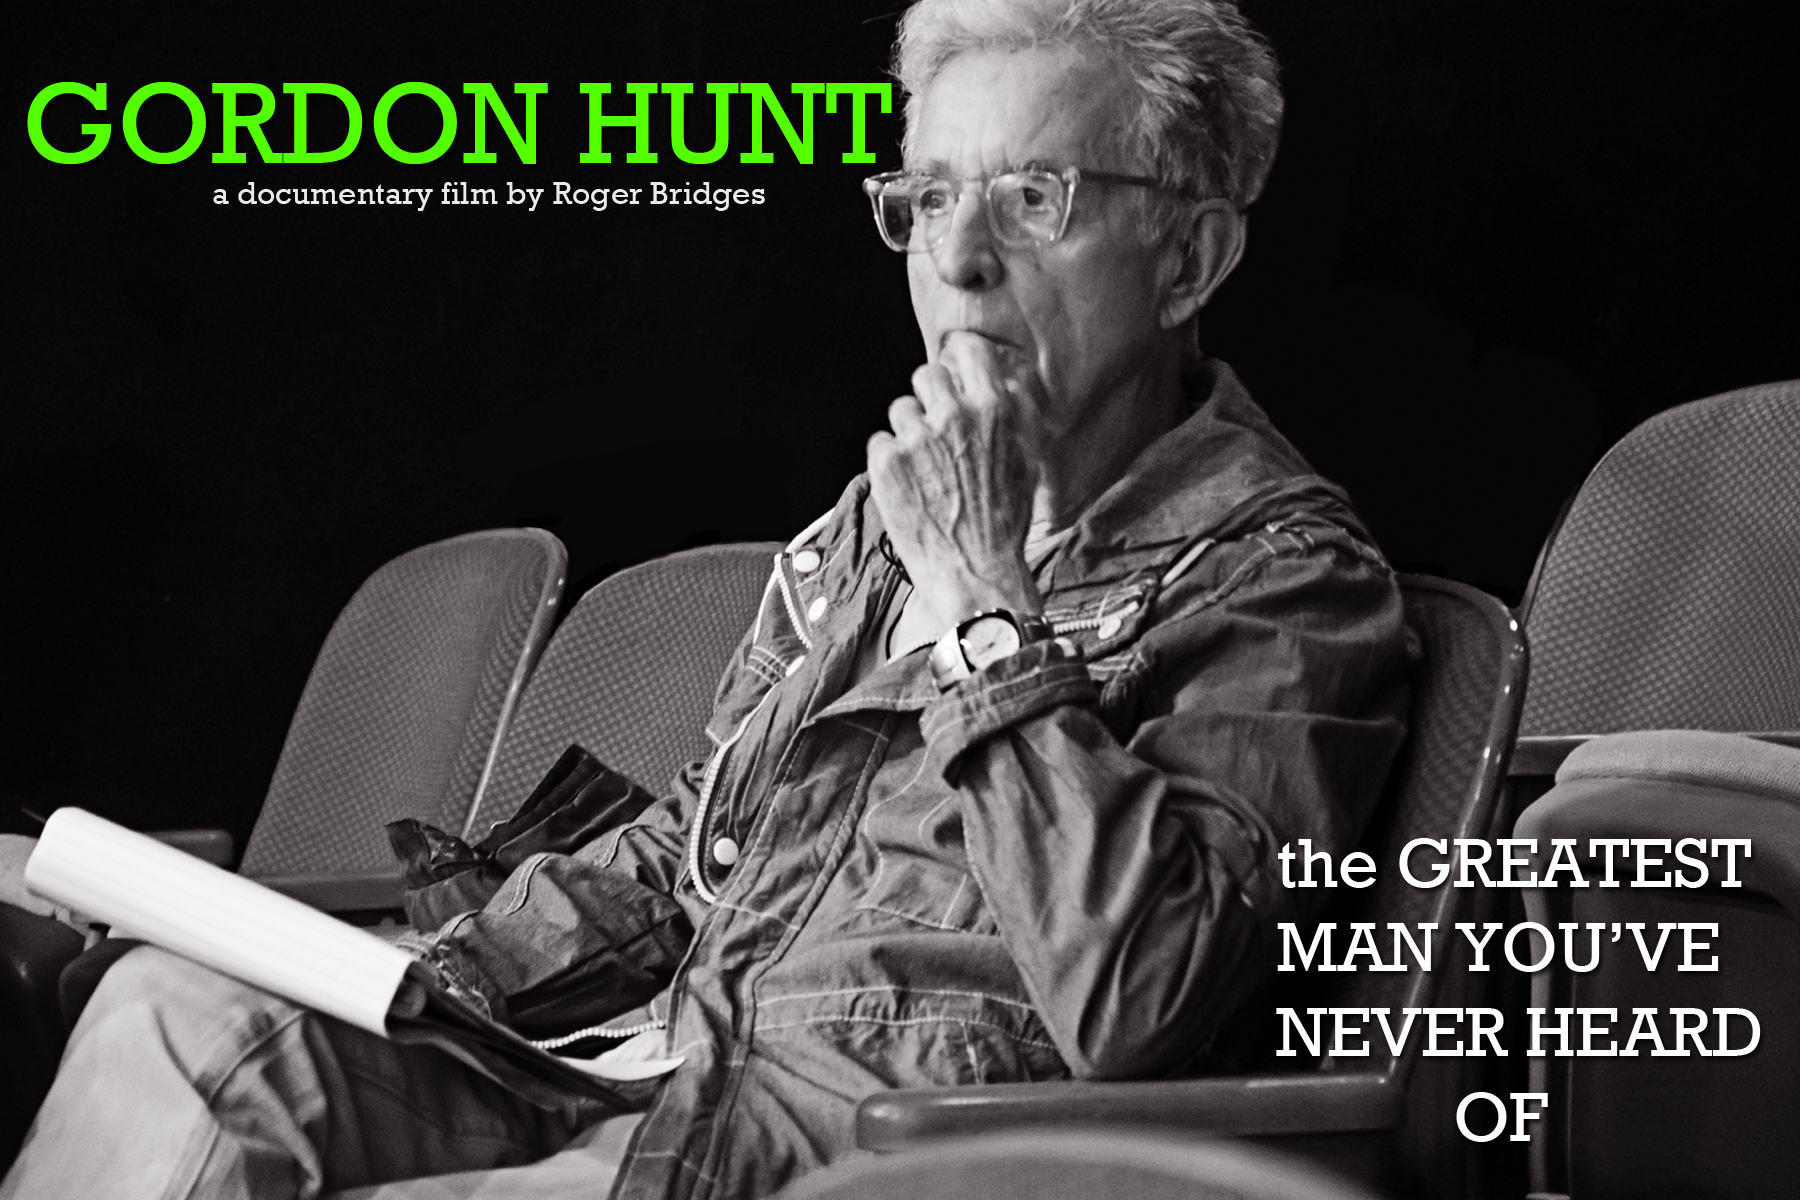 THE GORDON HUNT DOCUMENTARY PROJECT - Directed by Roger Bridges